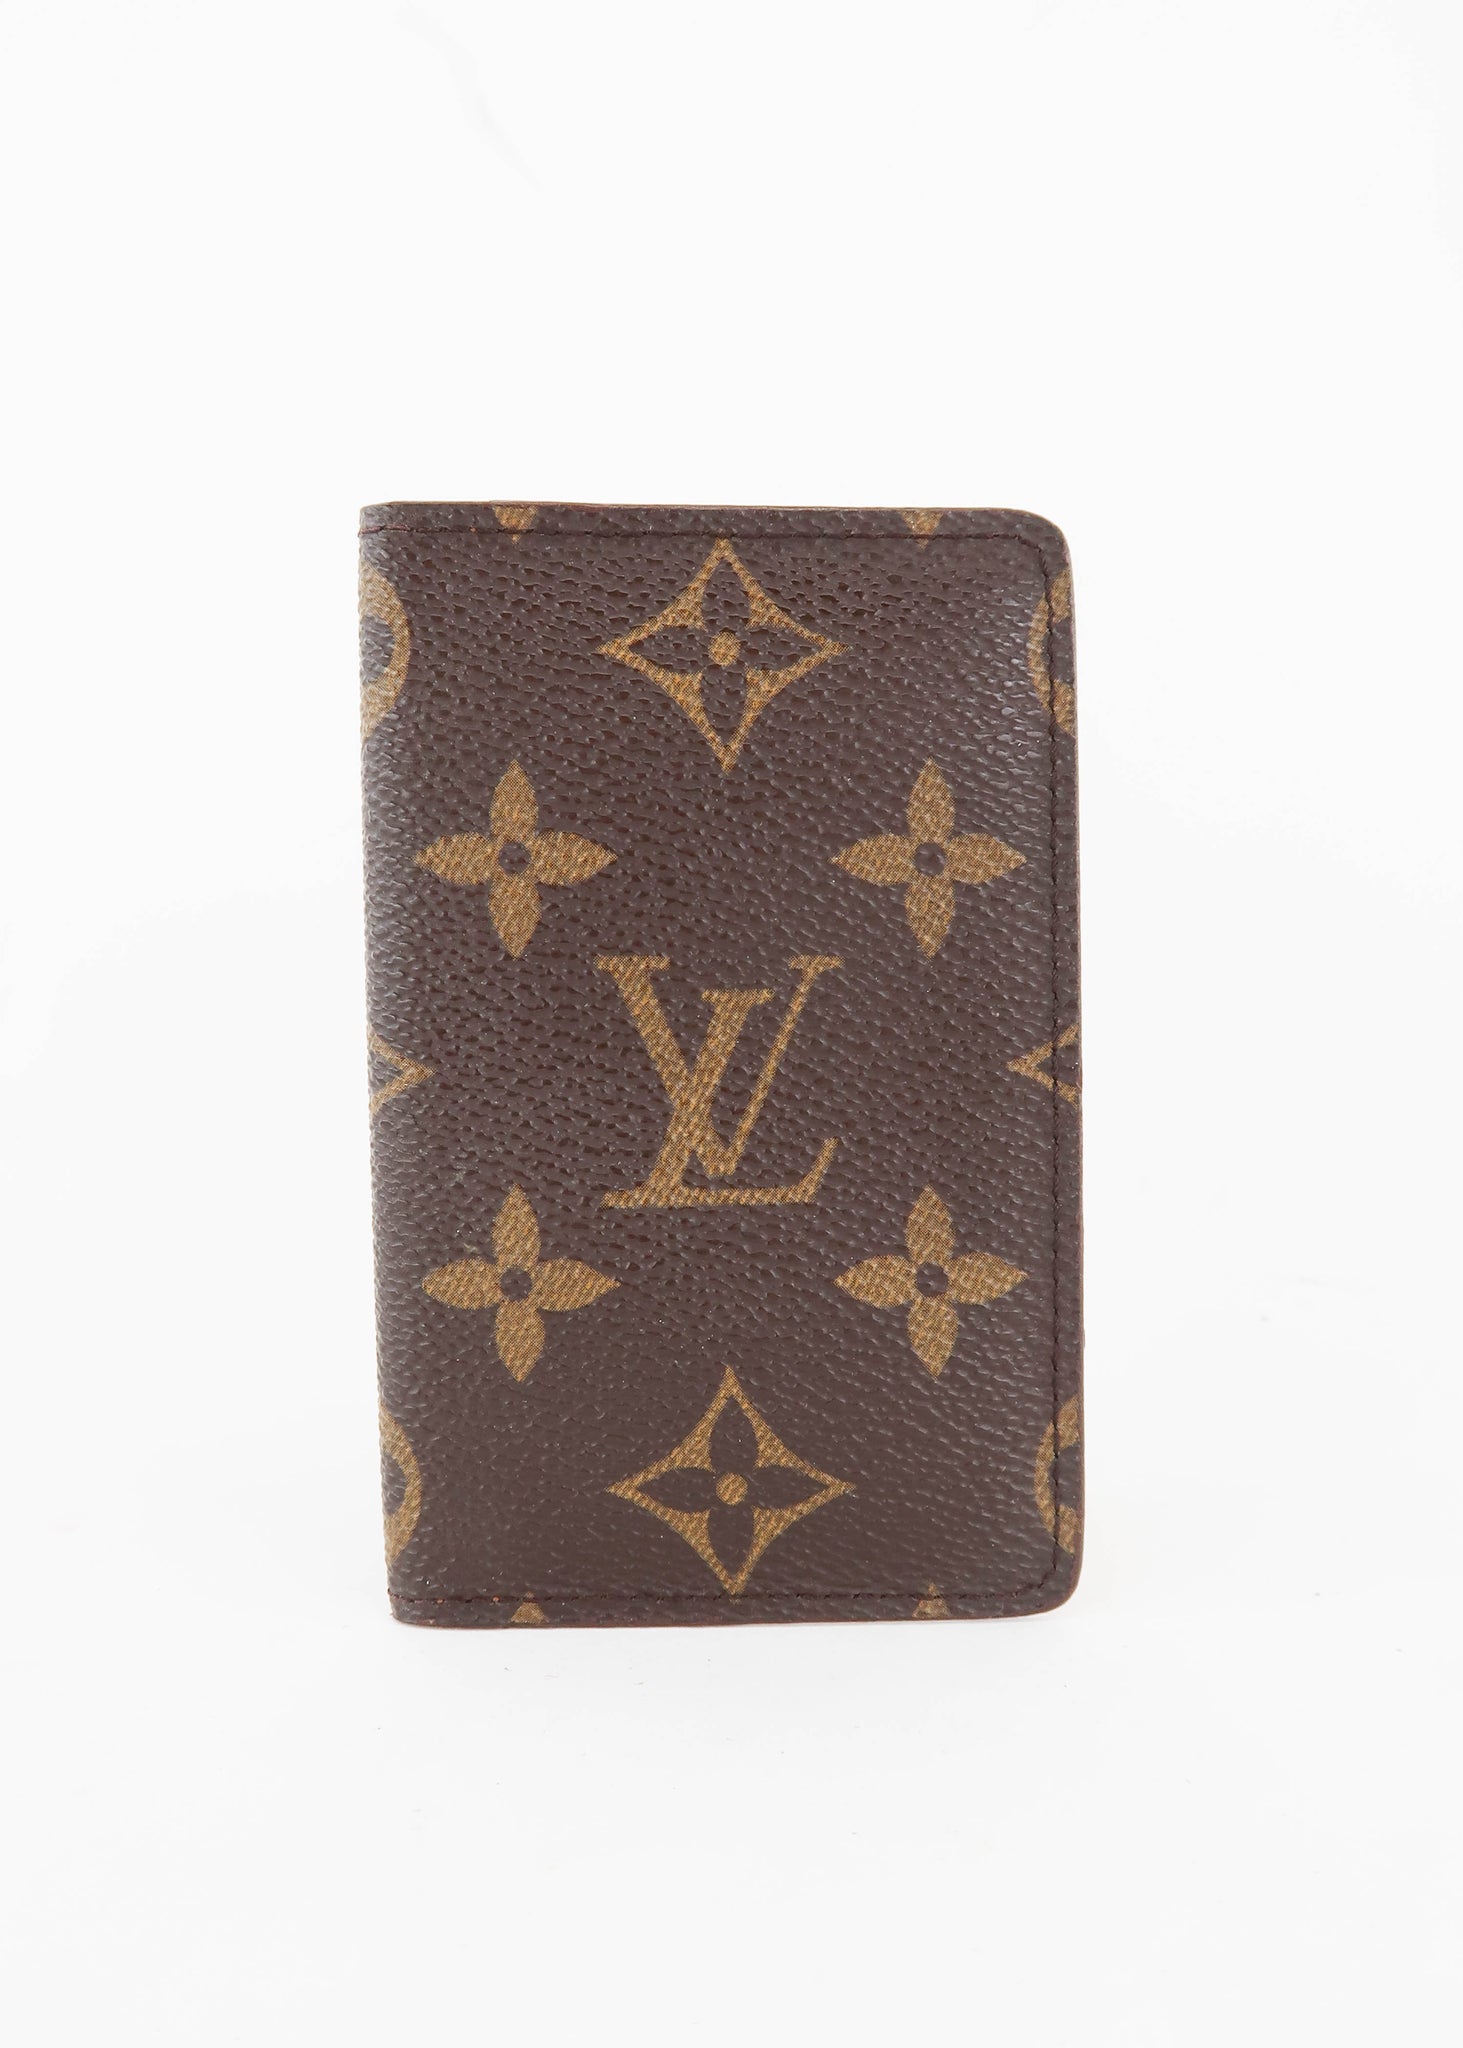 How to tell if a Louis Vuitton Pocket Organizer is real 